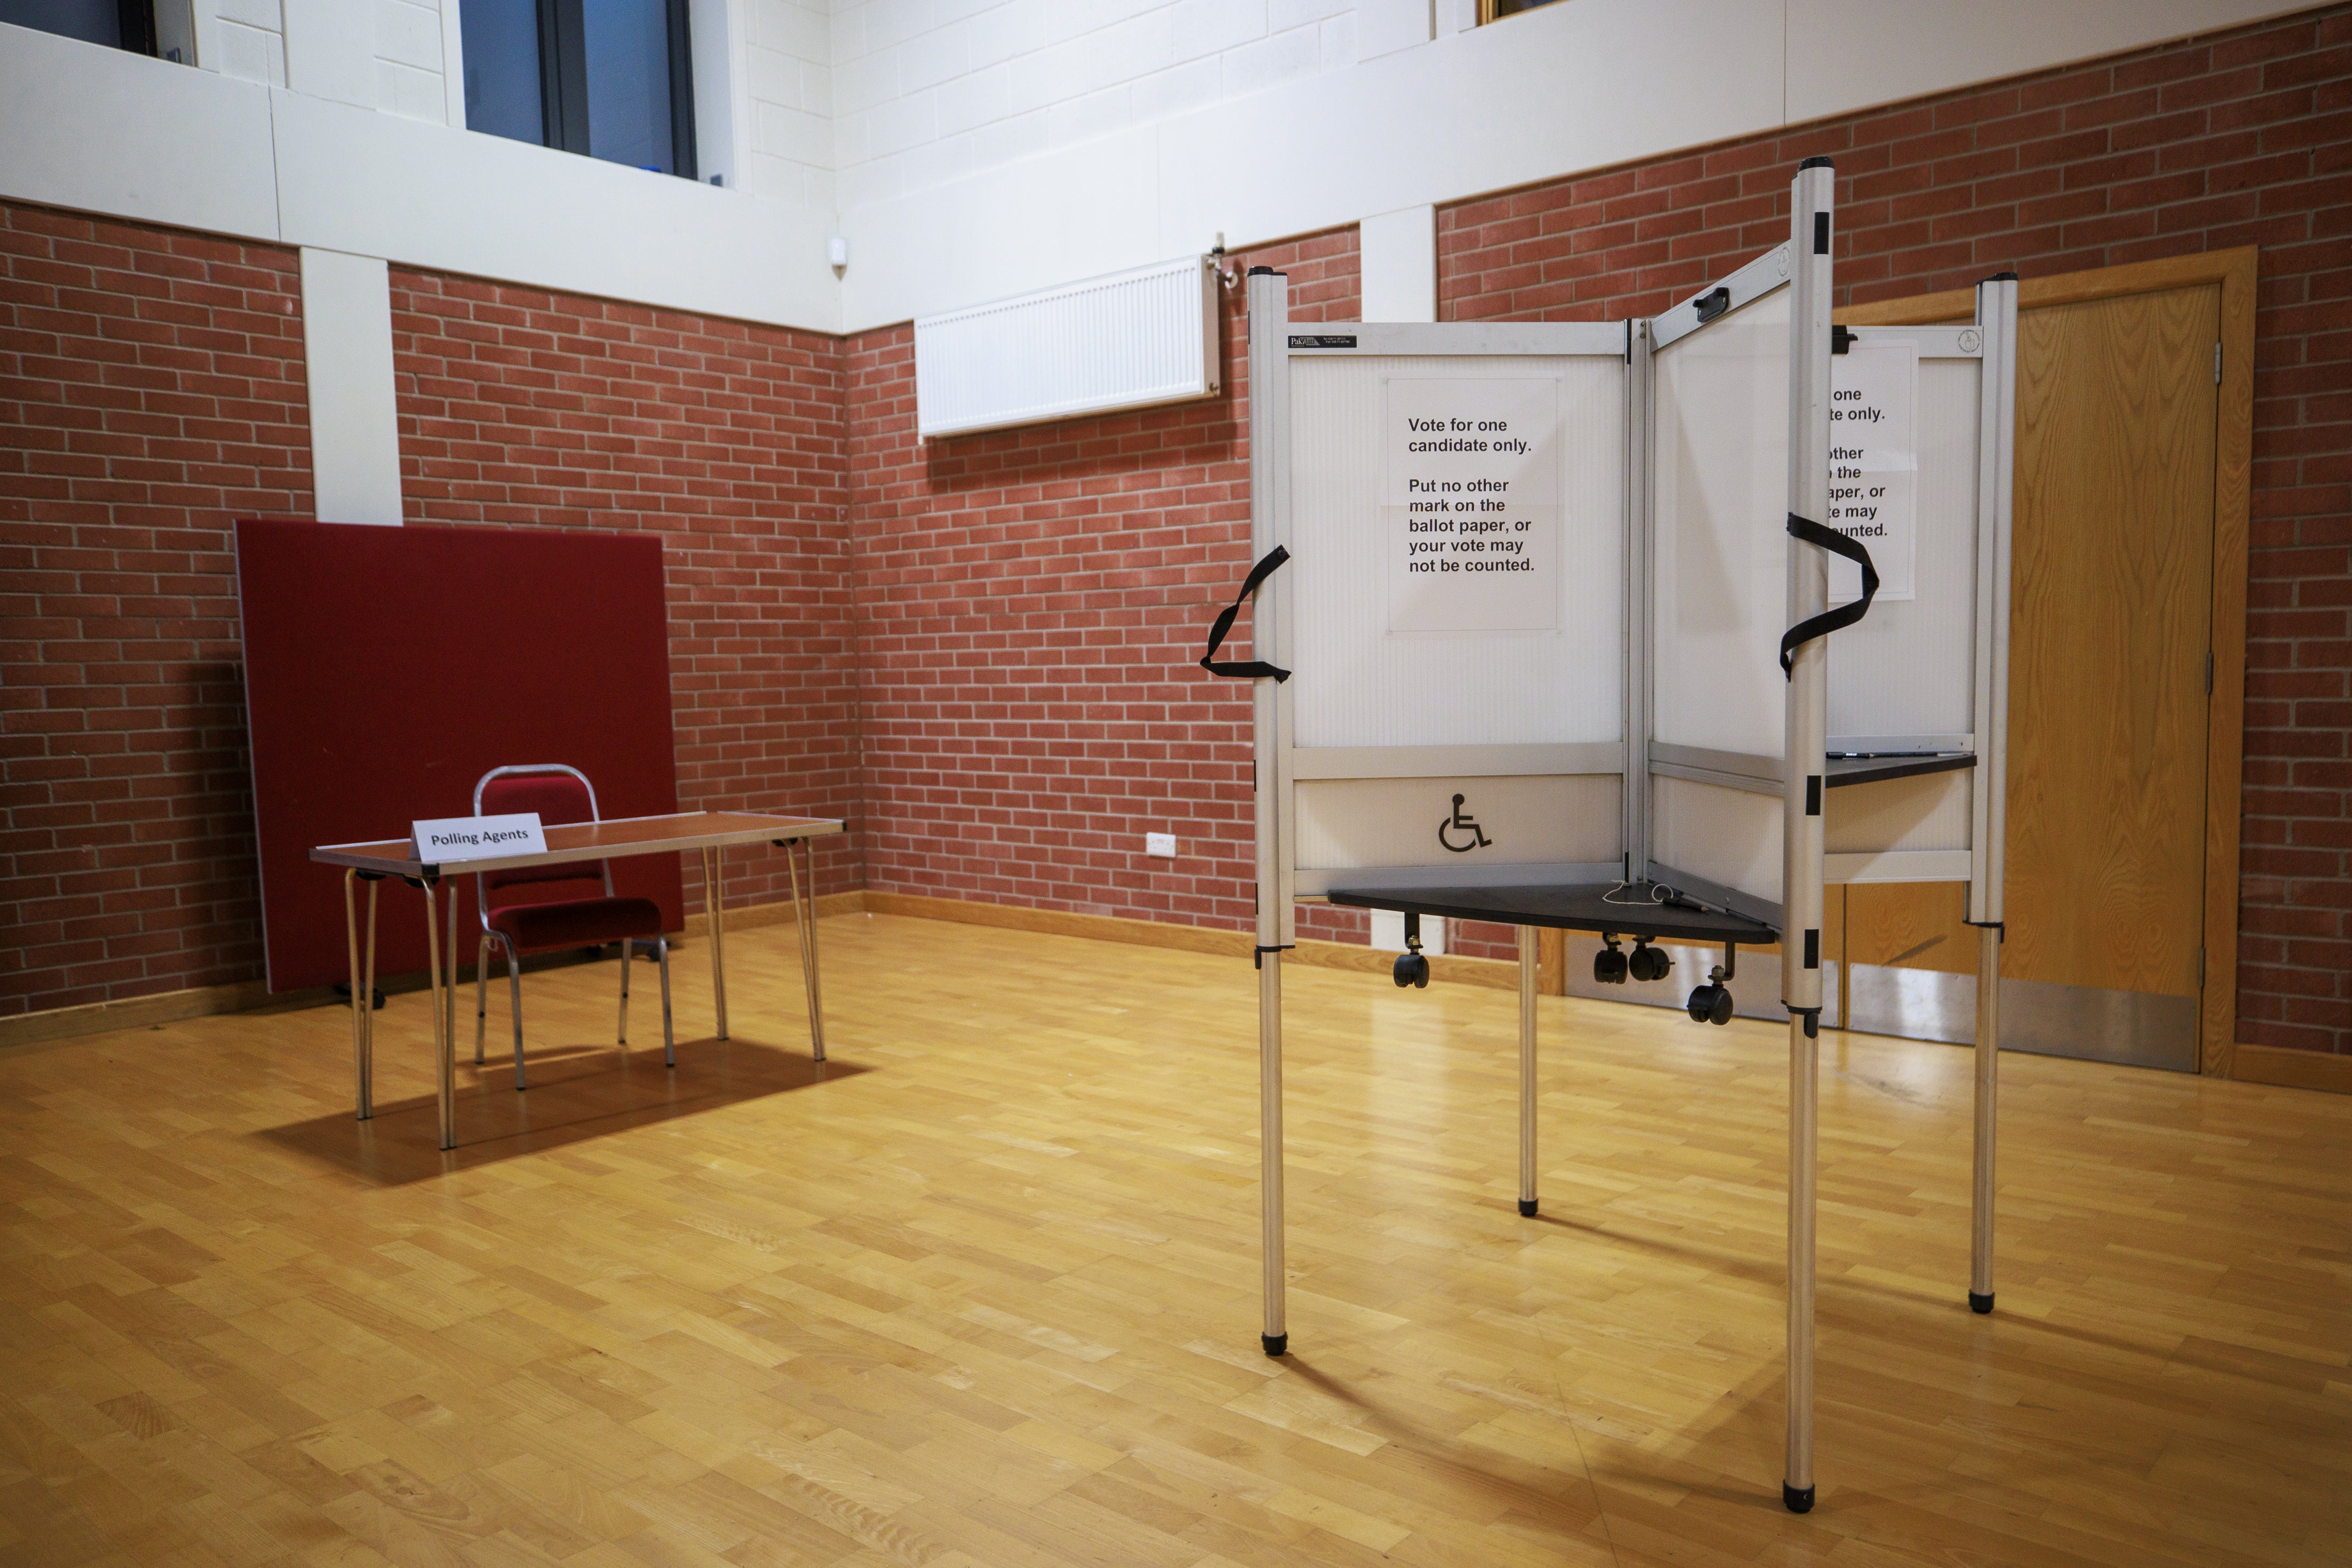 A voting booth at the Agape Centre polling station in south Belfast (Liam McBurney/PA)